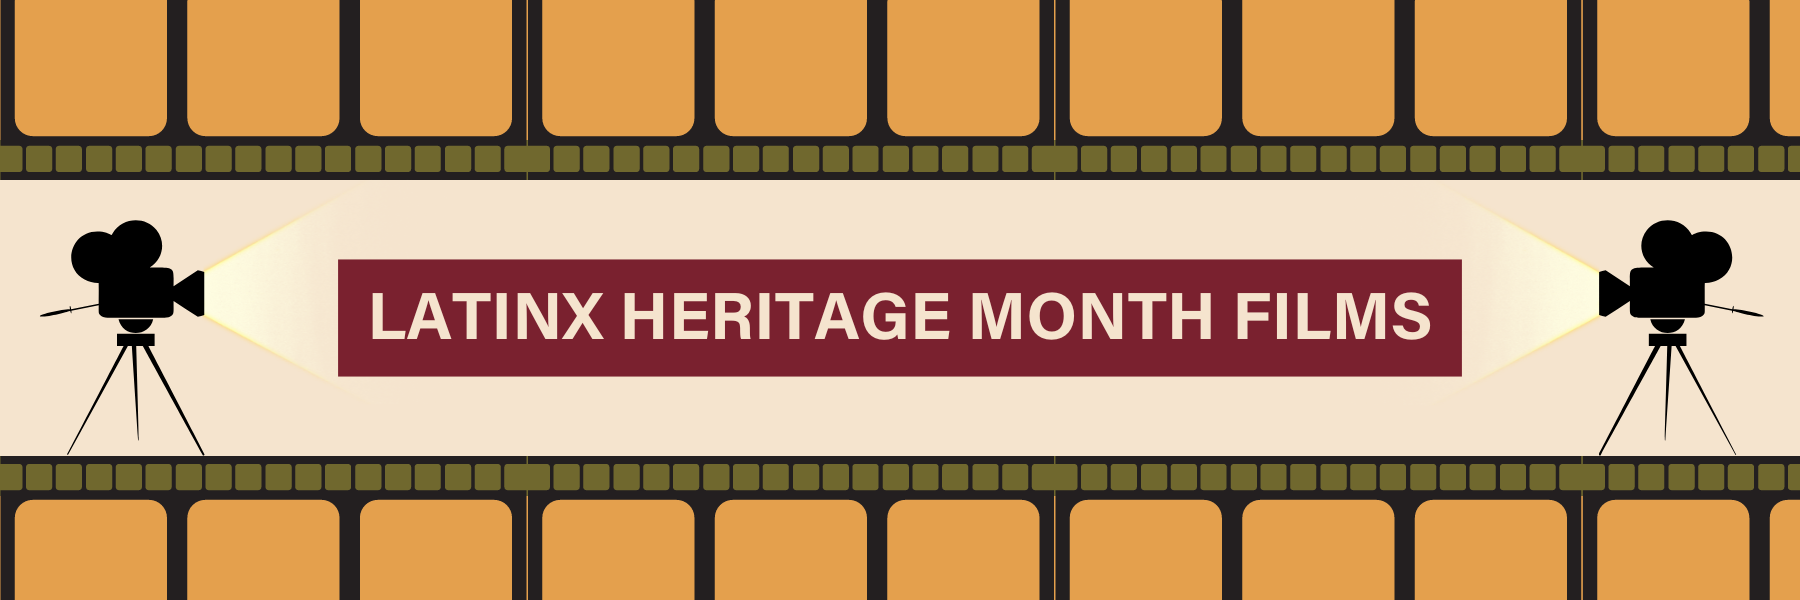 Latinx Heritage Month Films. Graphic of a film strip in orange and green colors with illustrations of traditional film projectors.